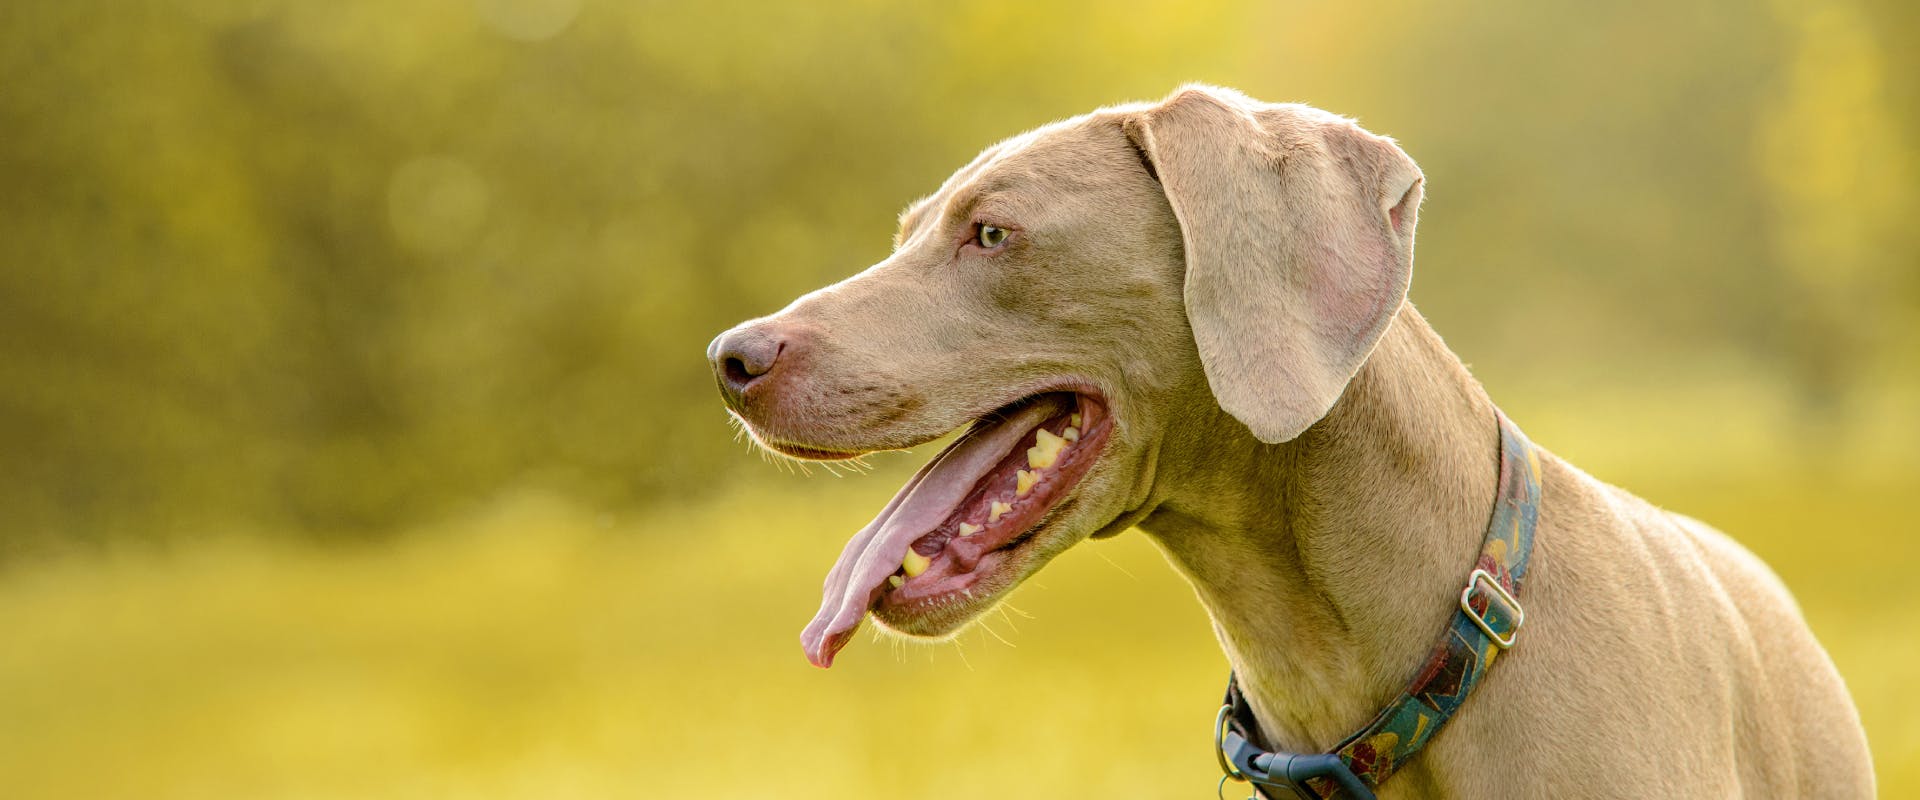 a Weimaraner stood panting and looking off to the left in a green and leafy park